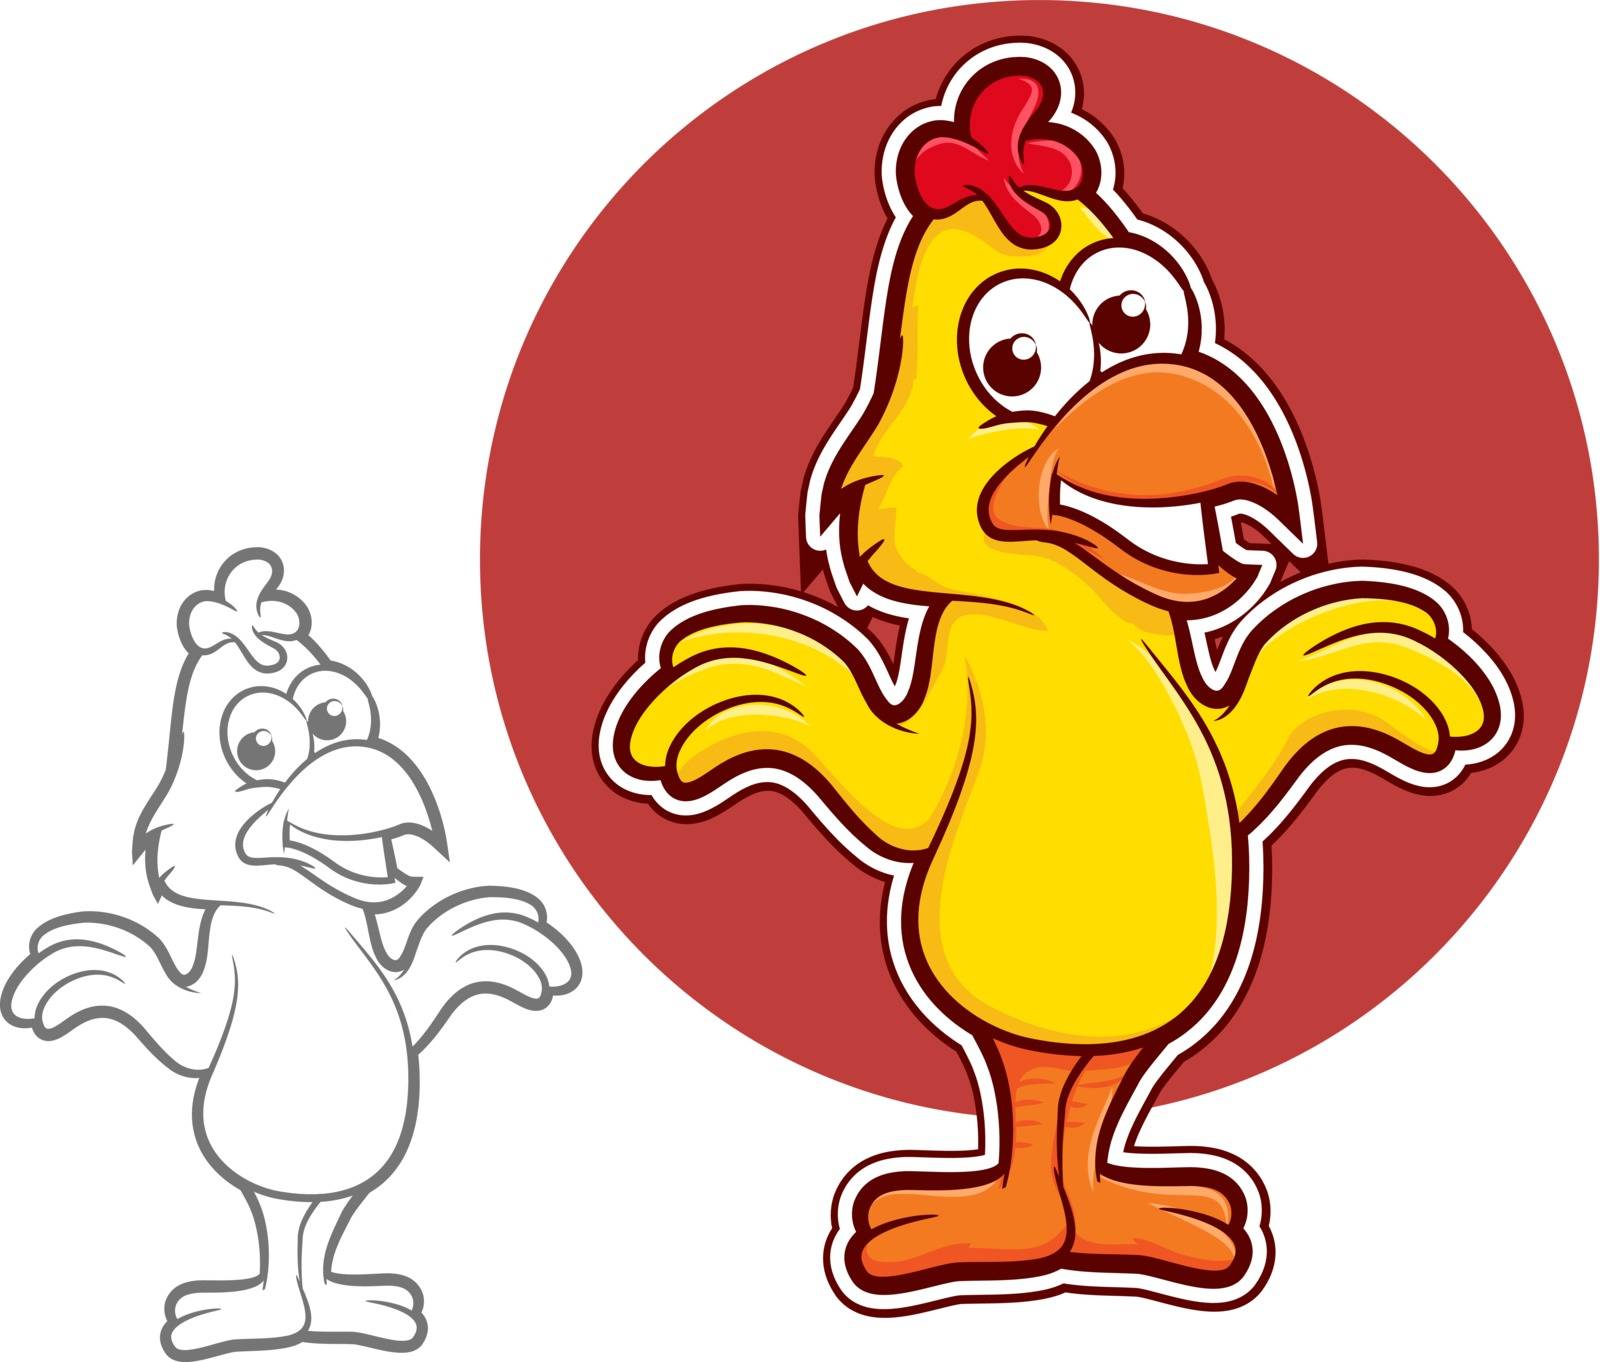 Chicken Character by graphicgeoff